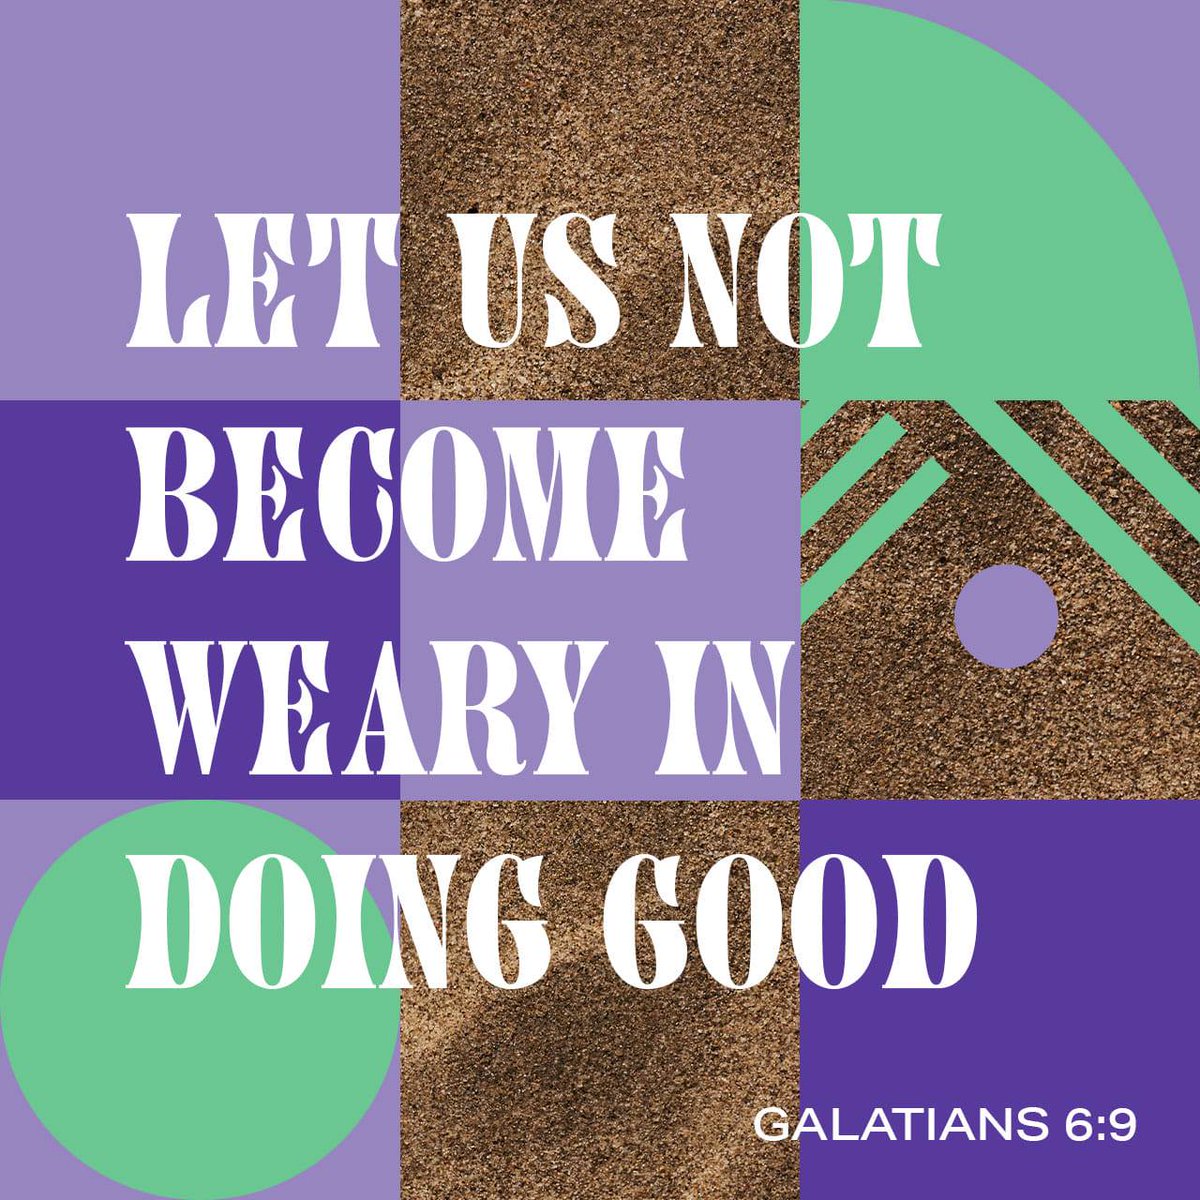 Galatians 6:9 KJV 'And let us not be weary in well doing: for in due season we shall reap, if we faint not.'